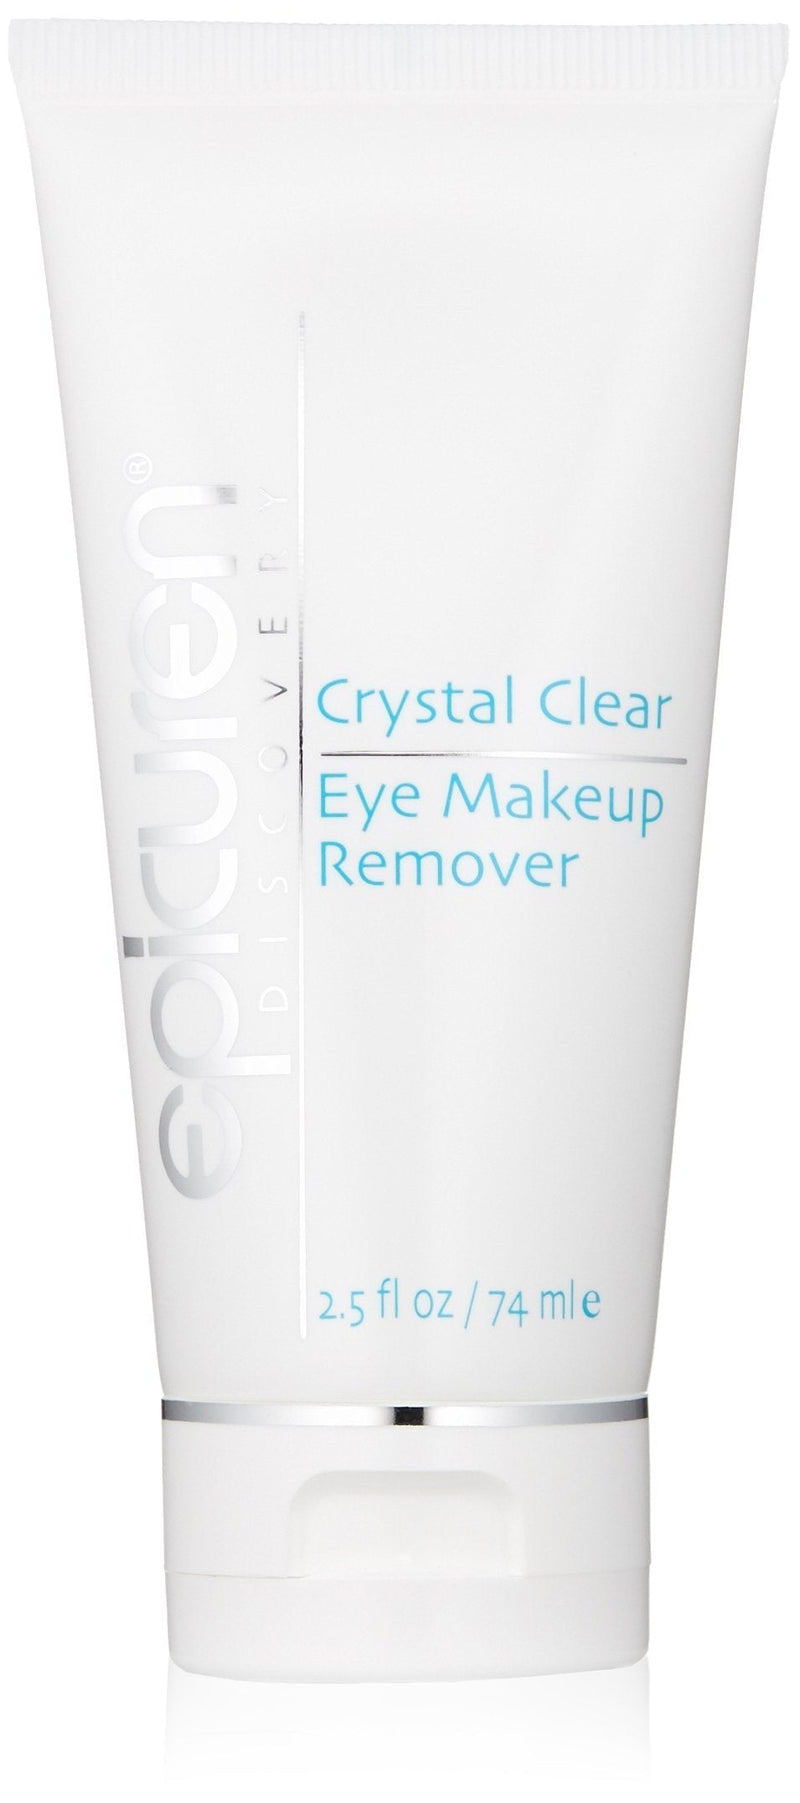 [Australia] - Epicuren Discovery Crystal Clear Eye Makeup Remover, 2.5 Fl Oz 